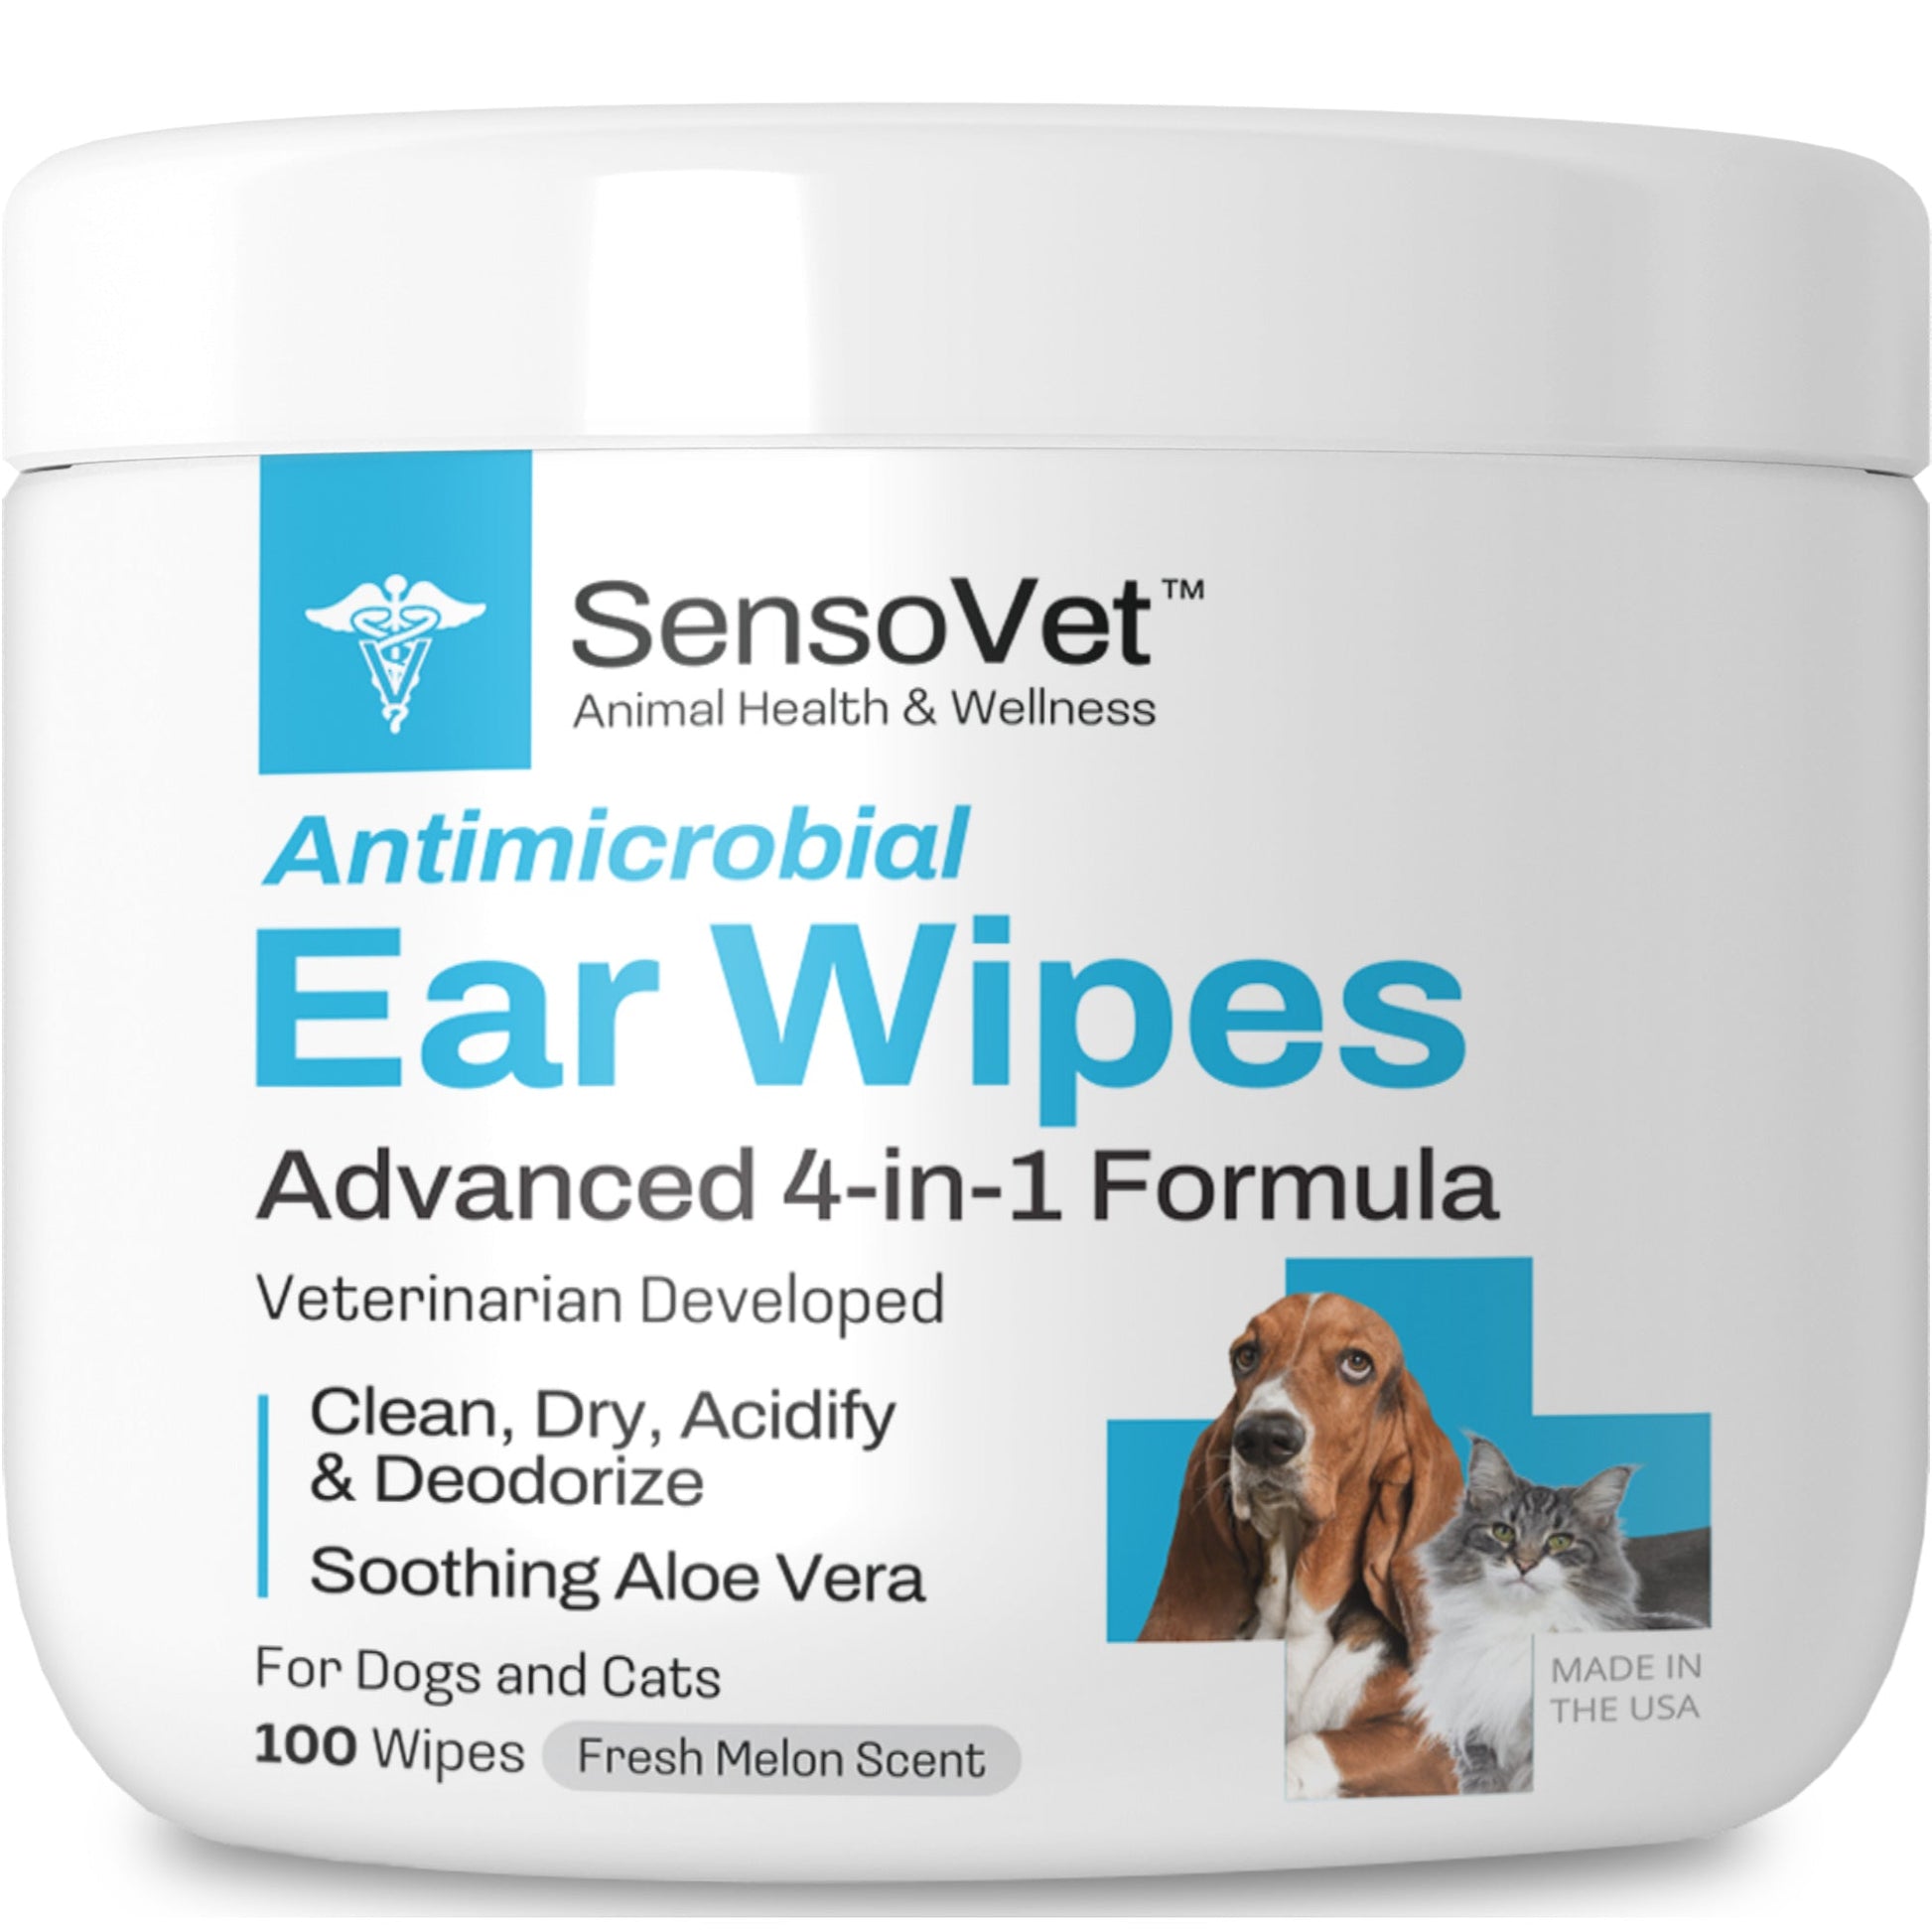 SensoVet Antimicrobial Ear Wipes for dogs and cats